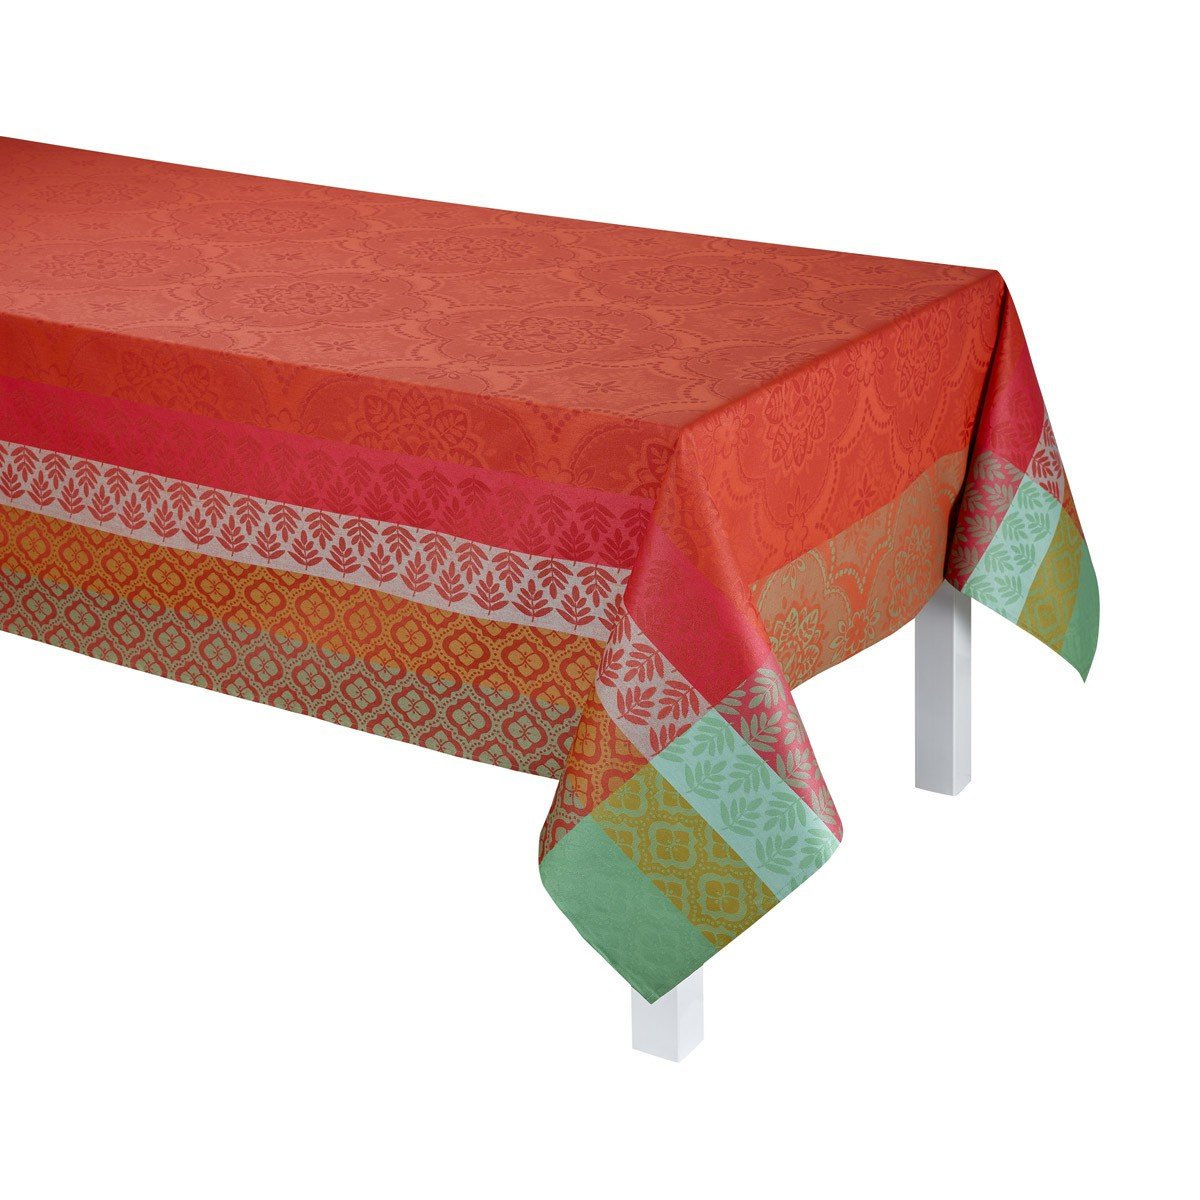 Le Jacquard Francais Coated Table Linen Bastide Red Fig Linens Tablecloth Napkin Placemat